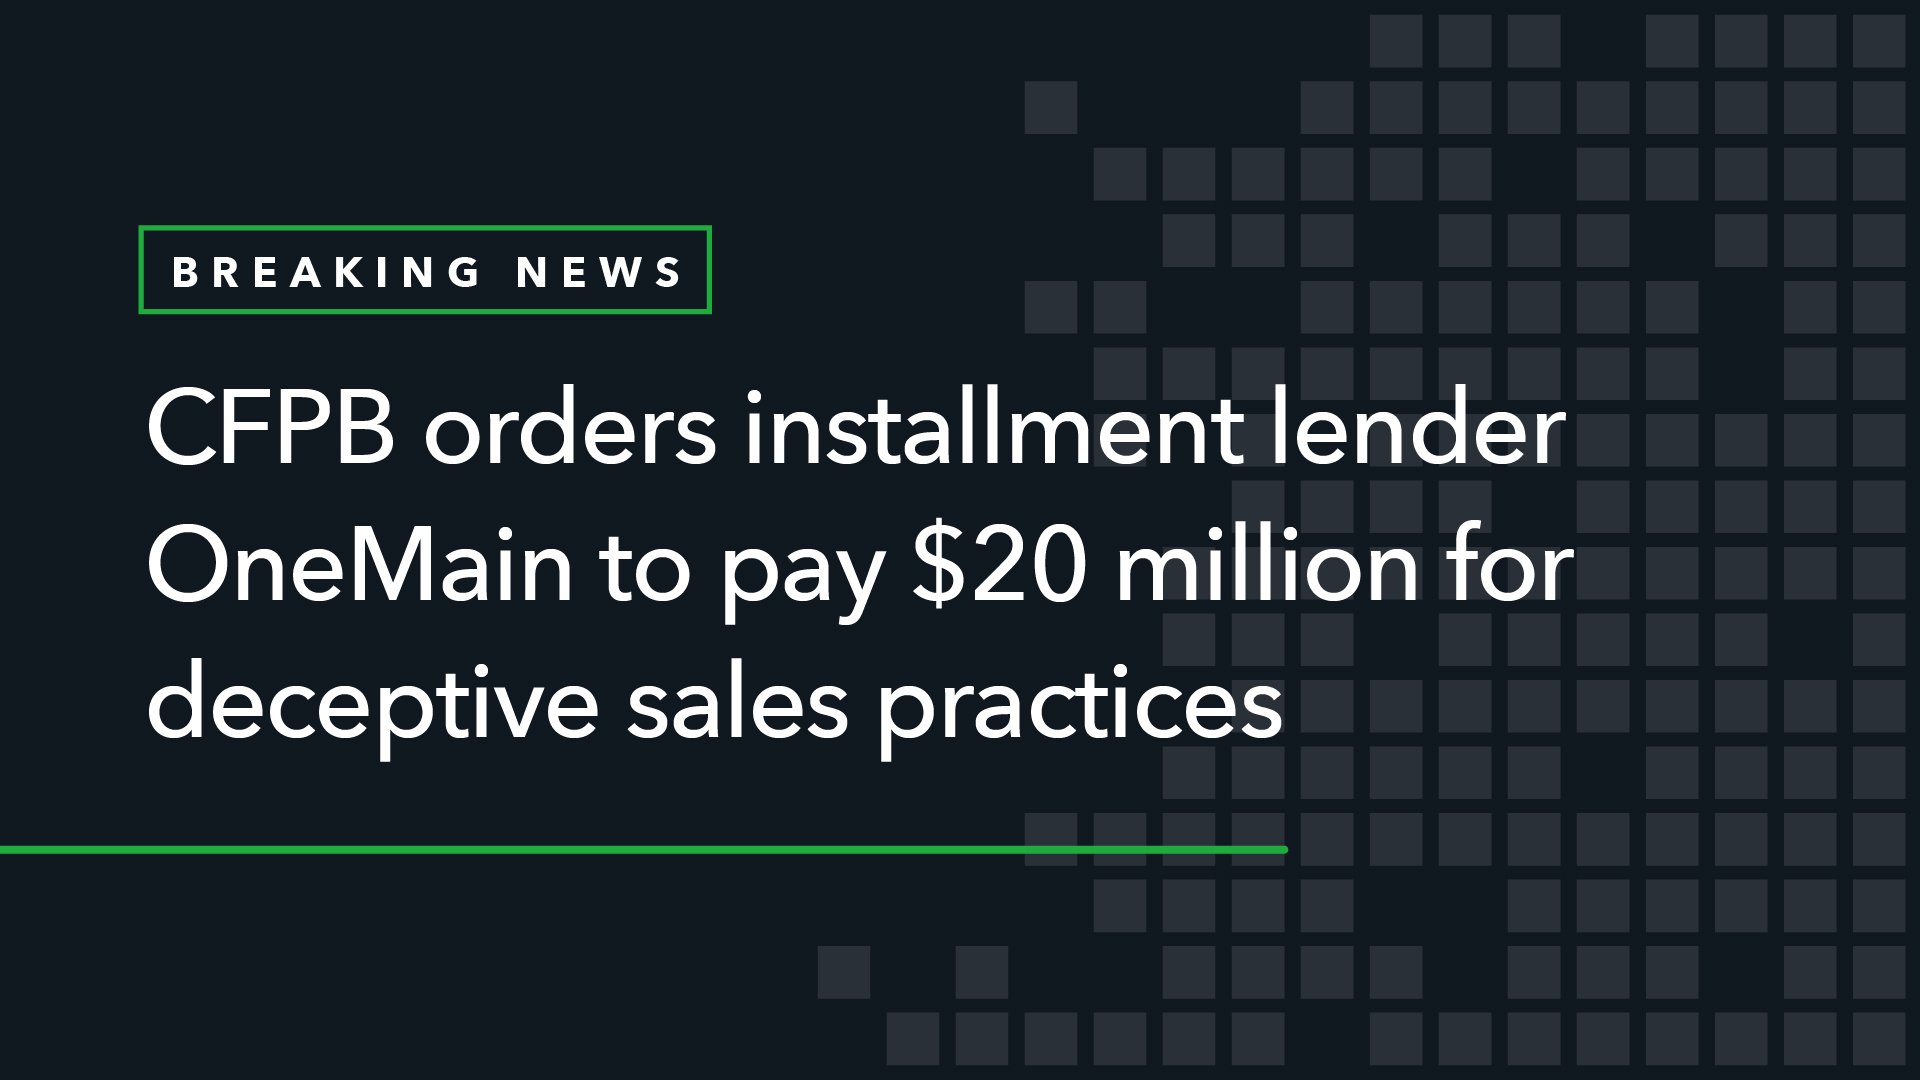 CFPB Orders Installment Lender OneMain to Pay  Million for Deceptive Sales Practices